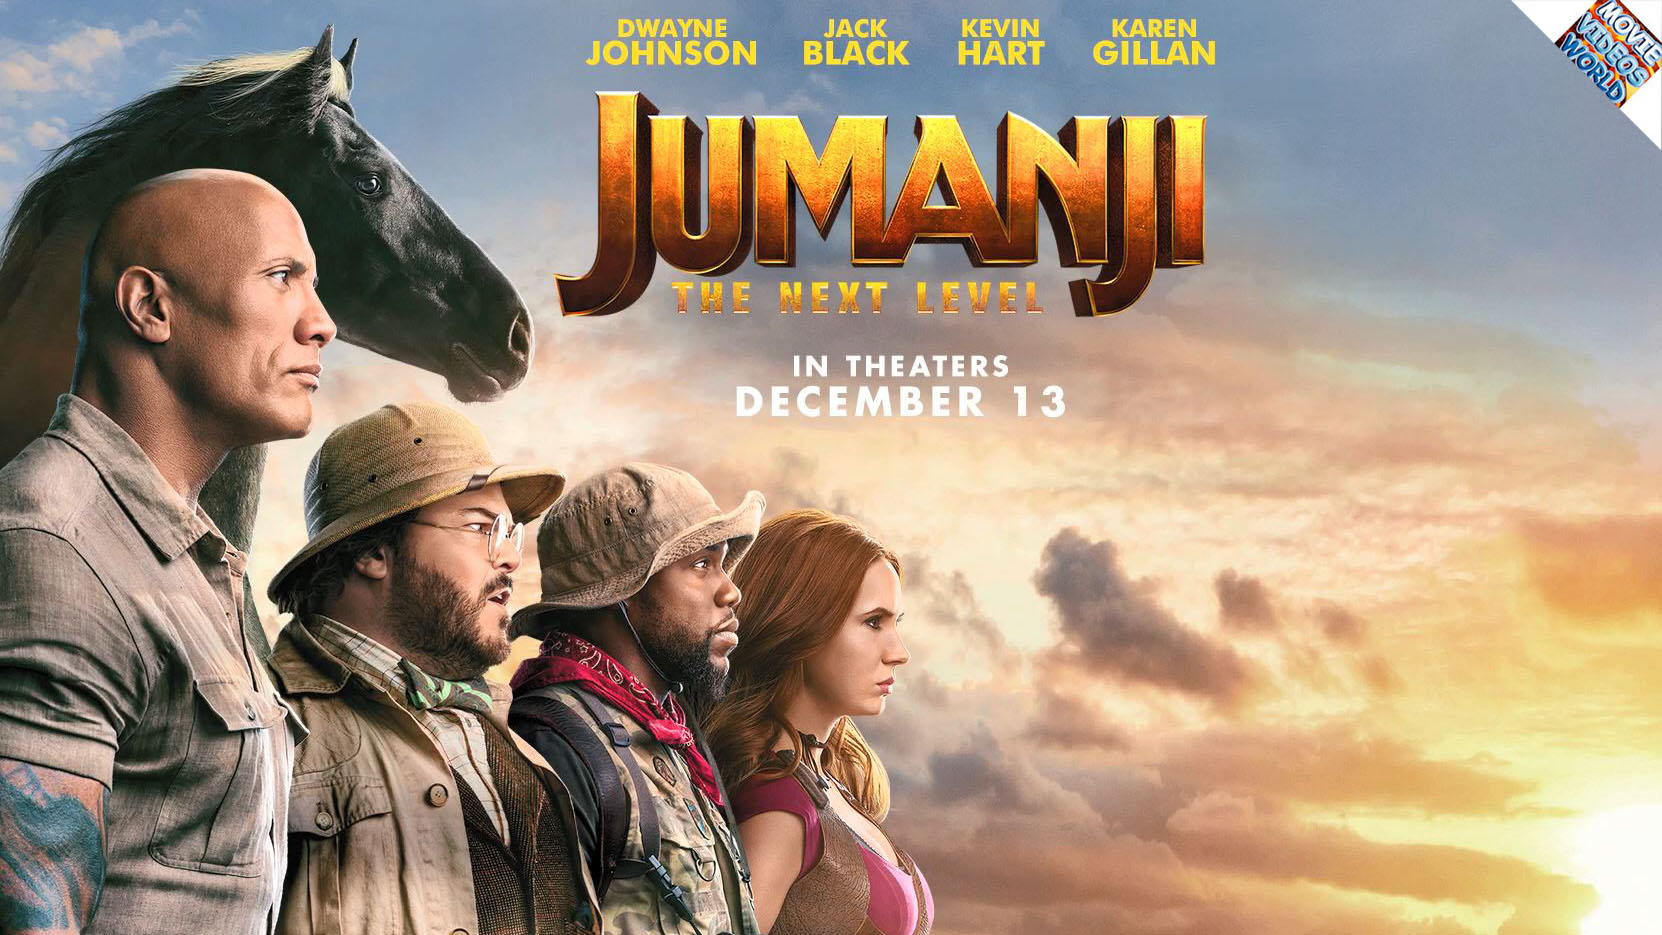 The gang is back but the game has changed. As they return to Jumanji to rescue one of their own, they discover that nothing is as they expect.